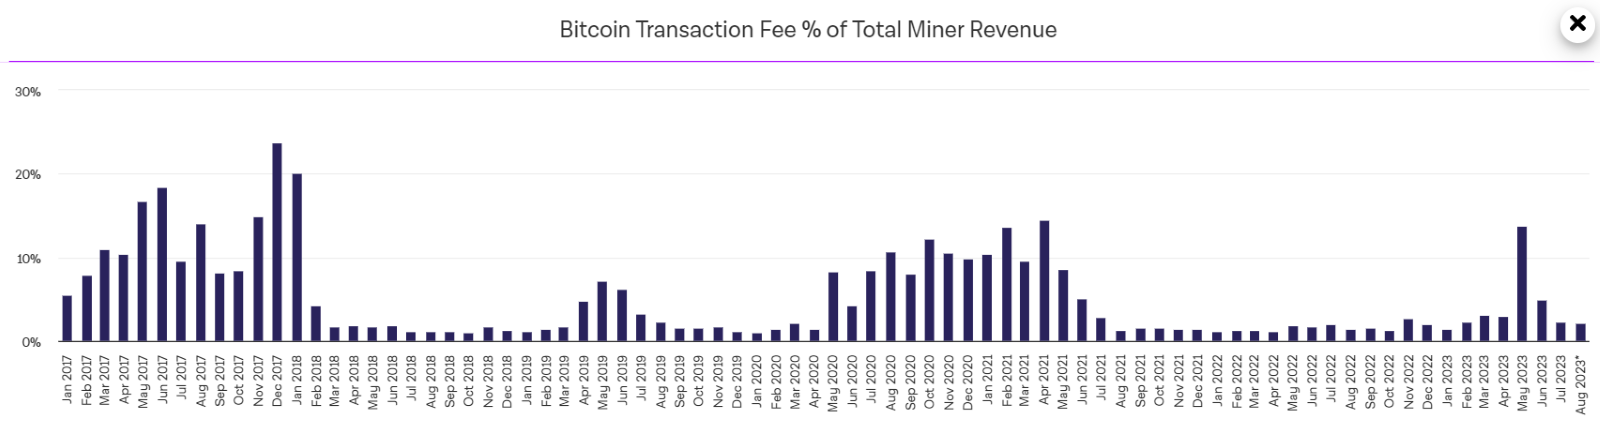 Bitcoin Transcation Fee % of Total Miner Revenue